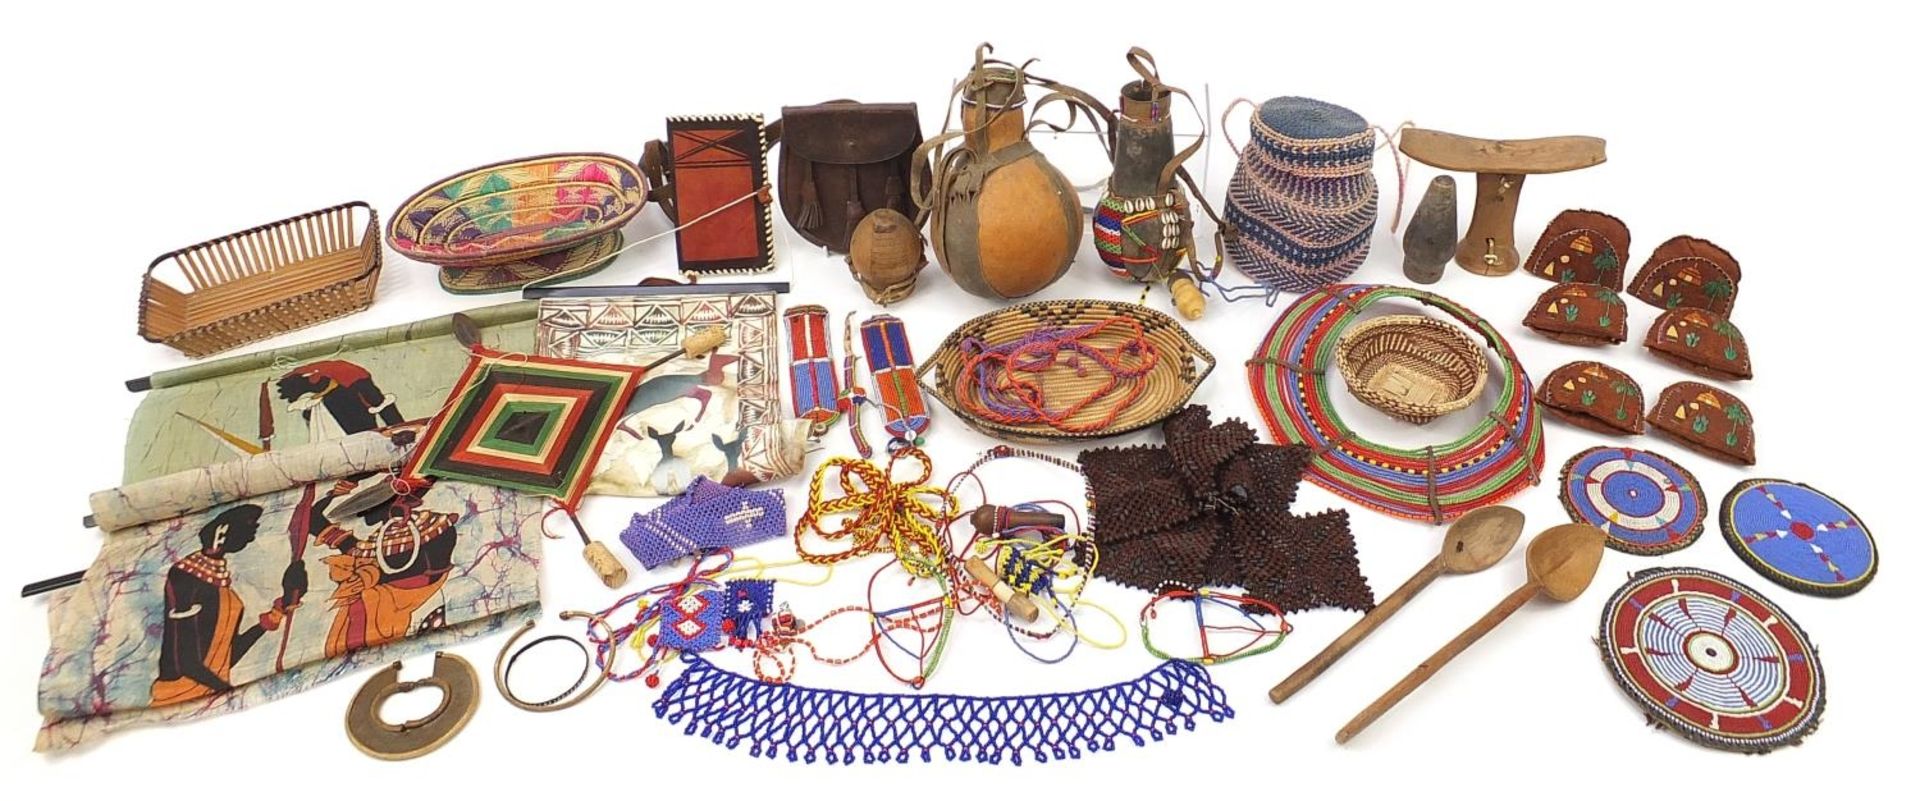 Tribal interest items including a carved wood headrest, gourd vessel with beadwork, tie-dye panels